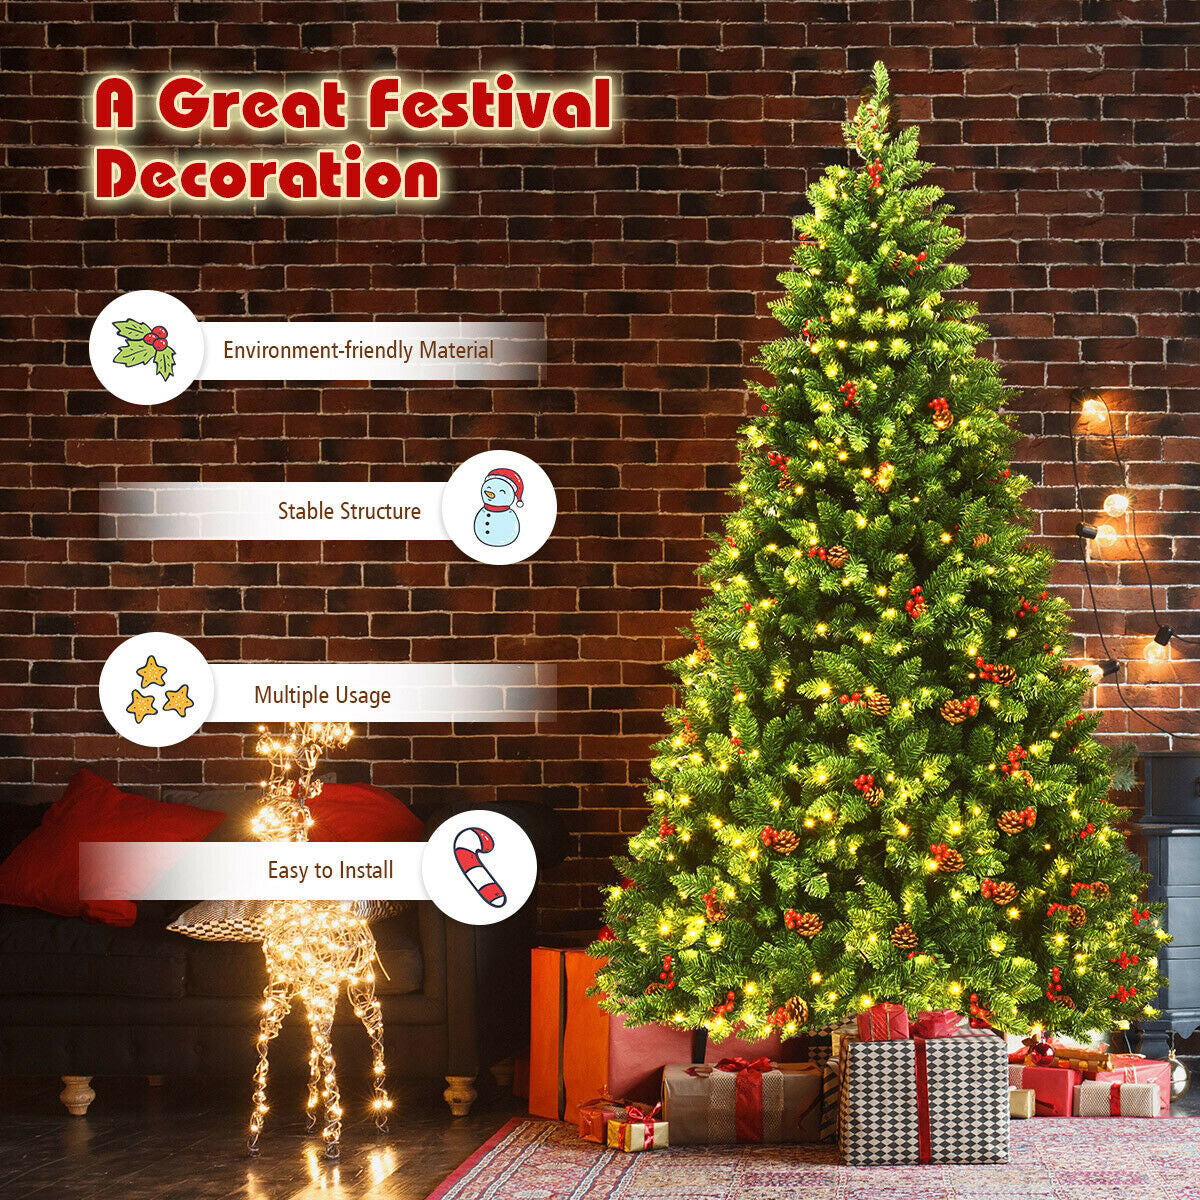 FORCLOVER 7.5-ft Black Artificial Christmas Tree | HYFW-TR825